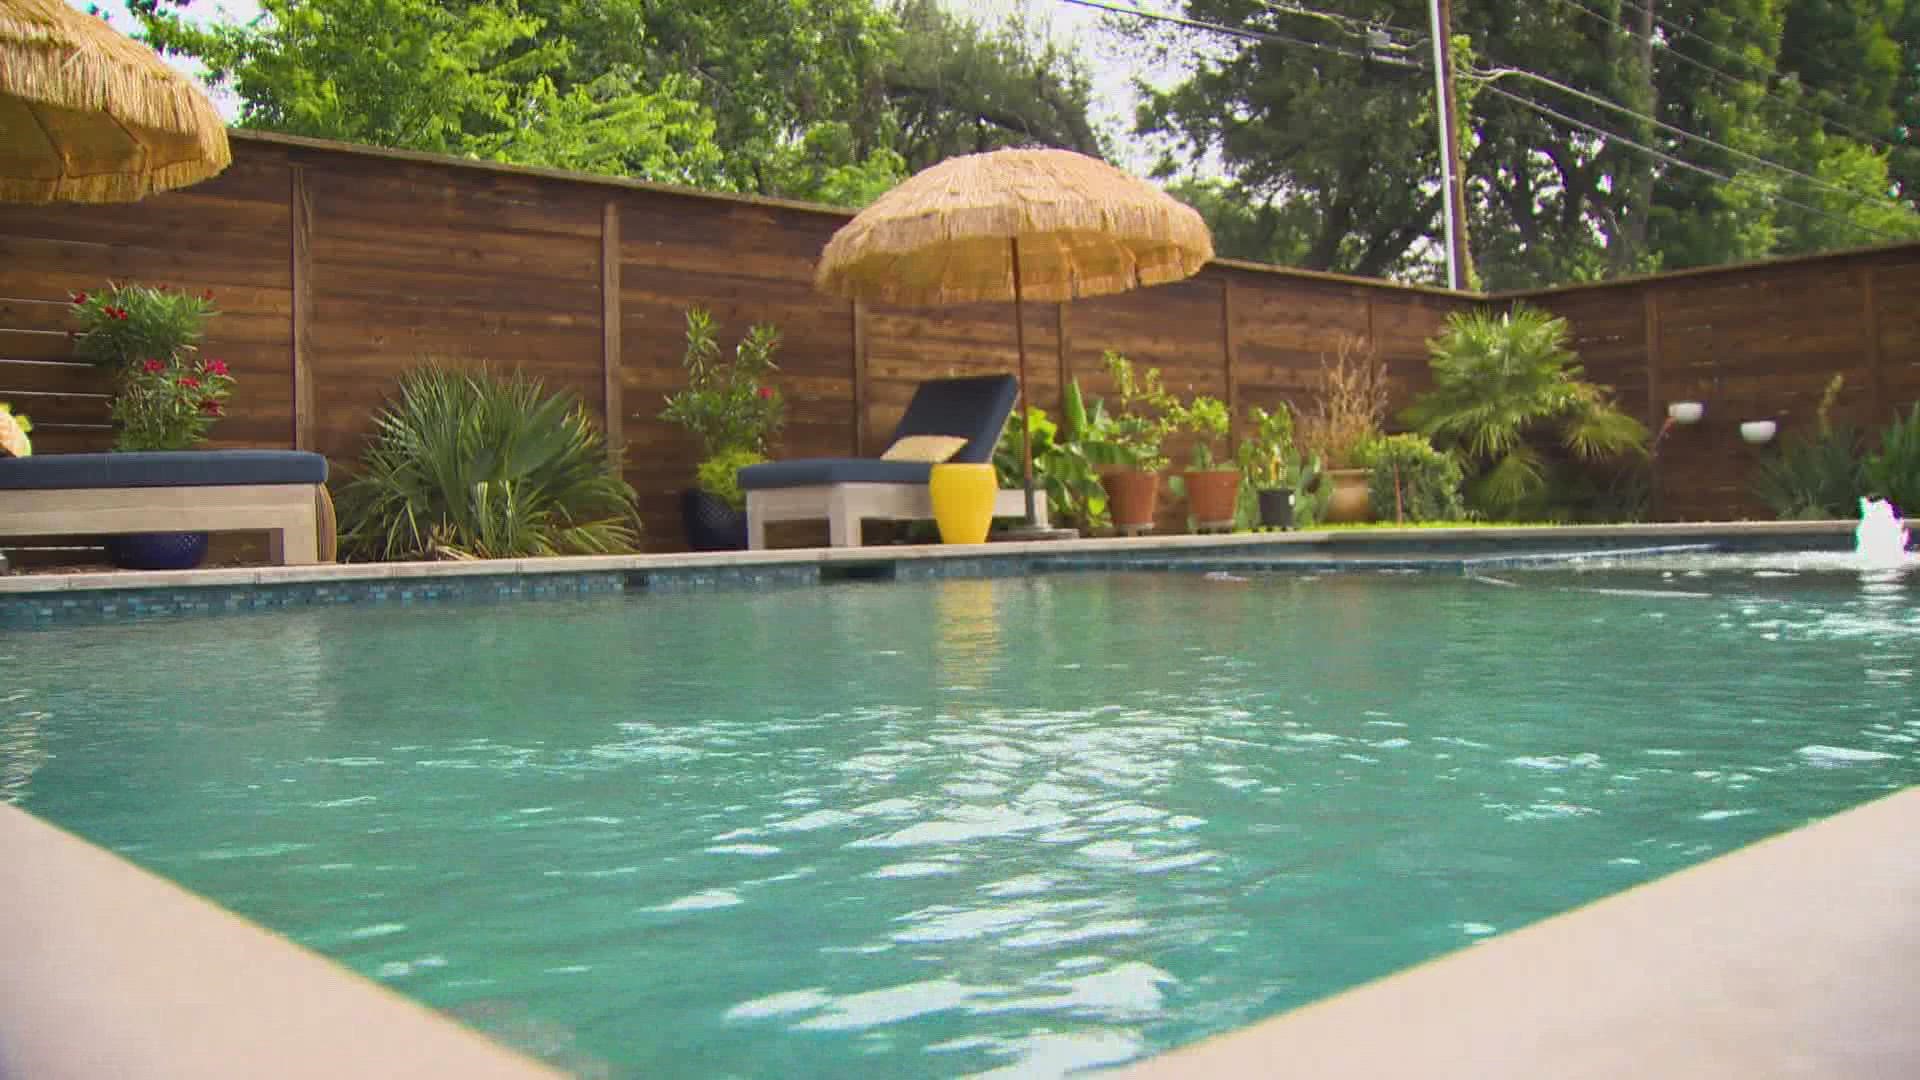 The Swimply app lets people rent out their private pools for a little extra money.